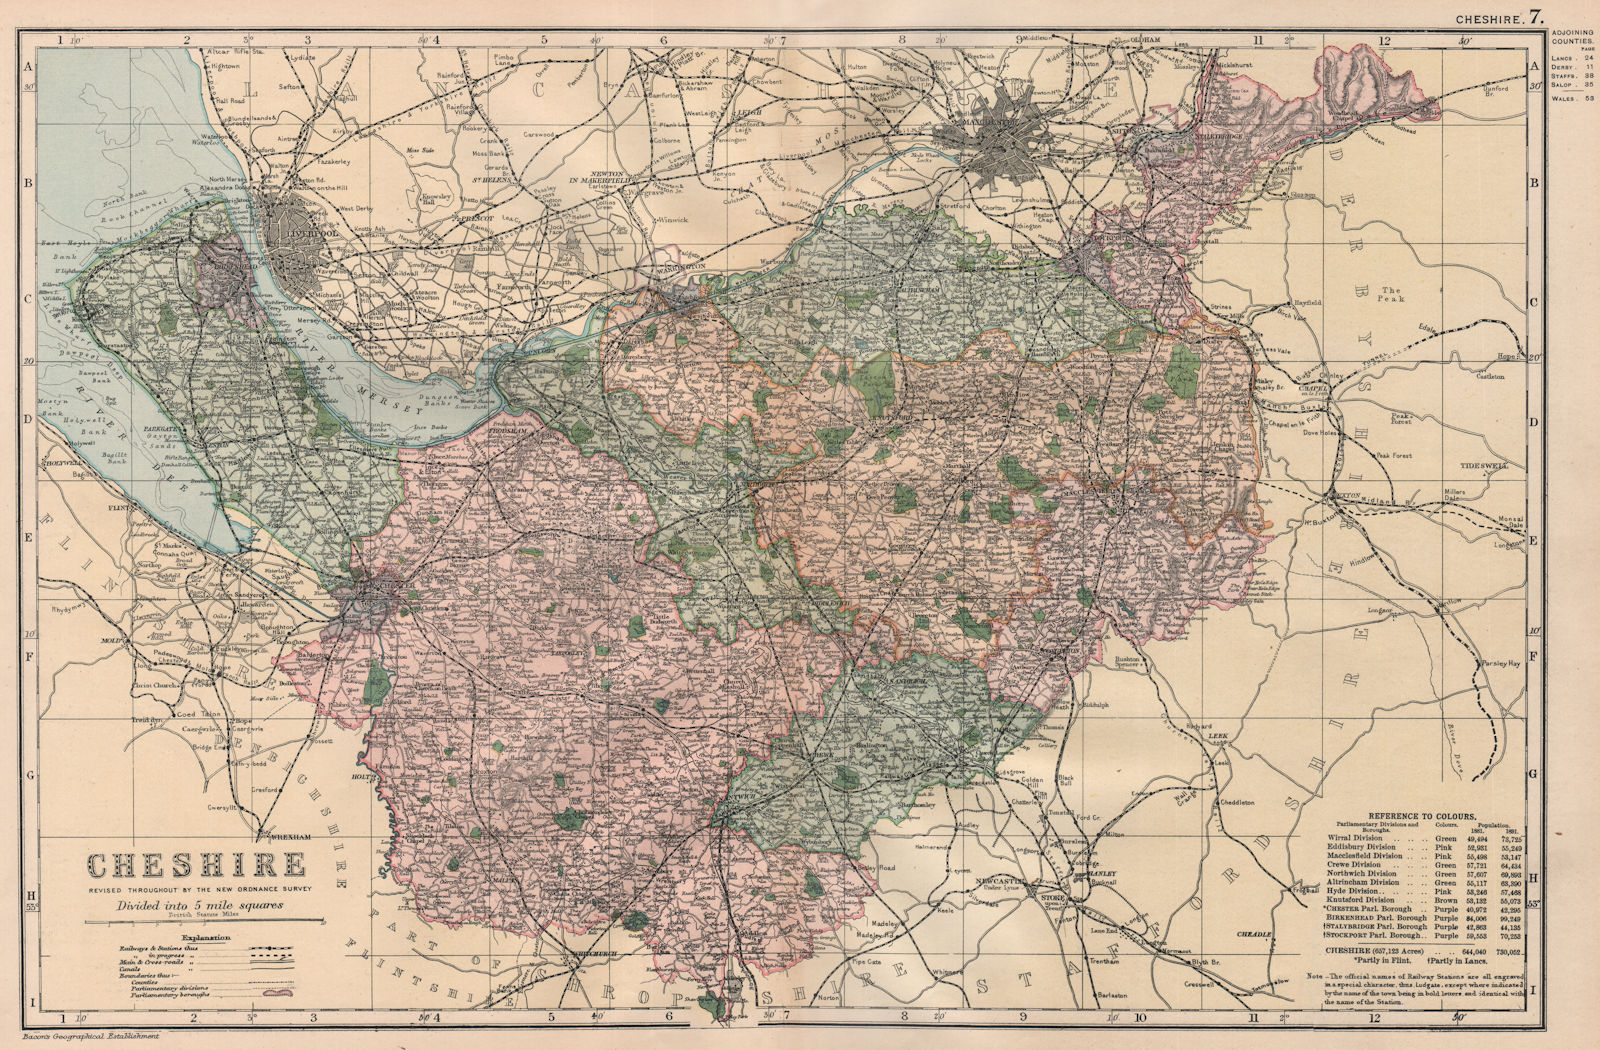 Associate Product CHESHIRE. Showing Parliamentary divisions, boroughs & parks. BACON 1896 map